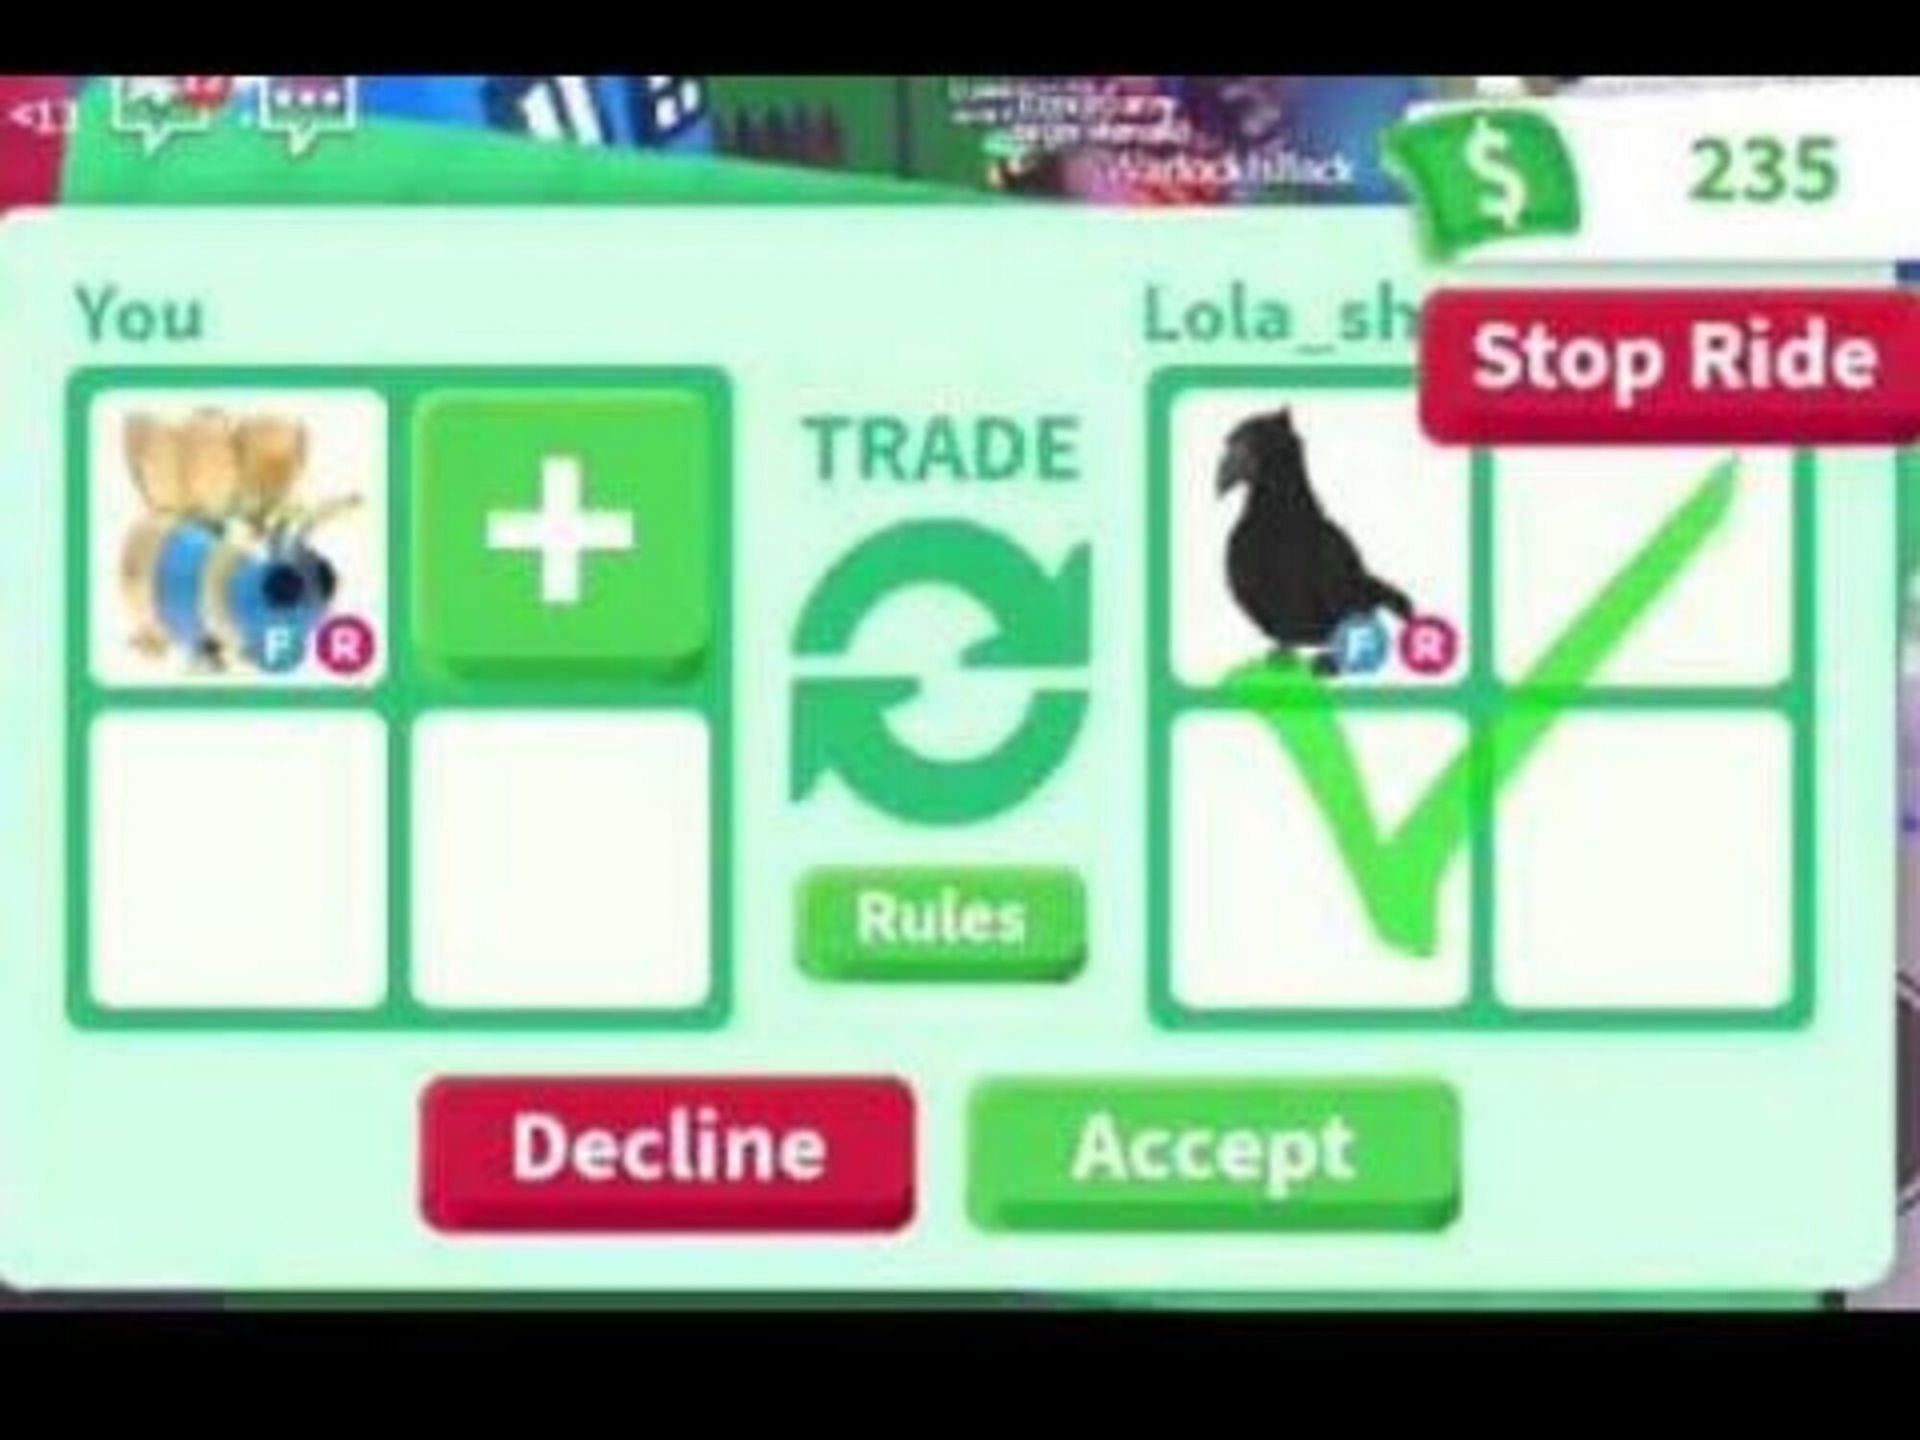 Players can trade pets with other players online (Image via YouTube)